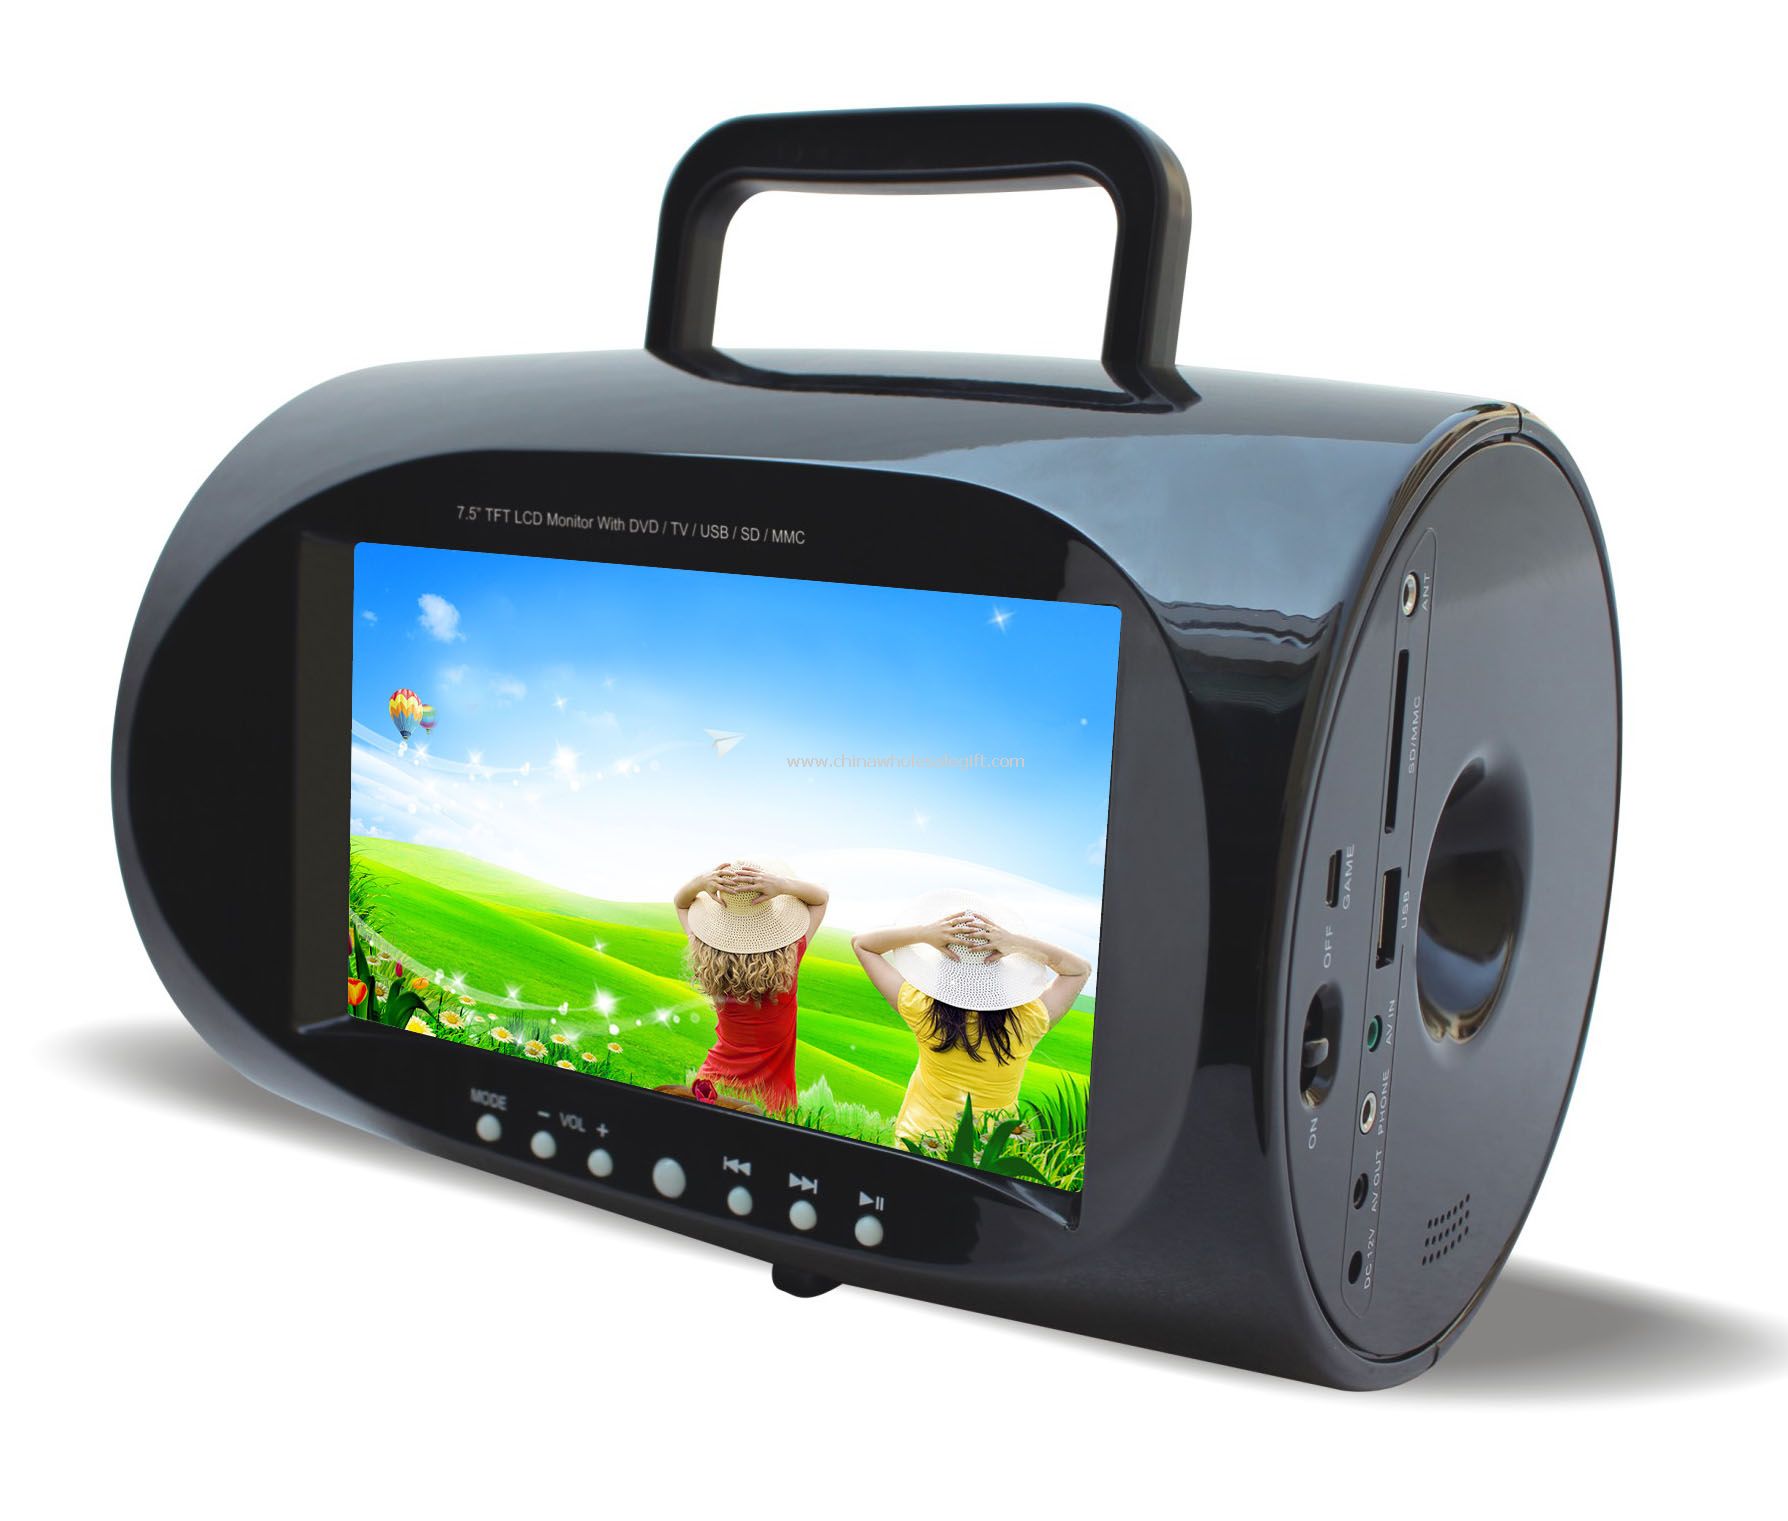 7 5 Inch Tft Monitor With Dvd Tv Usb Sd Mmc Portable Dvd Player